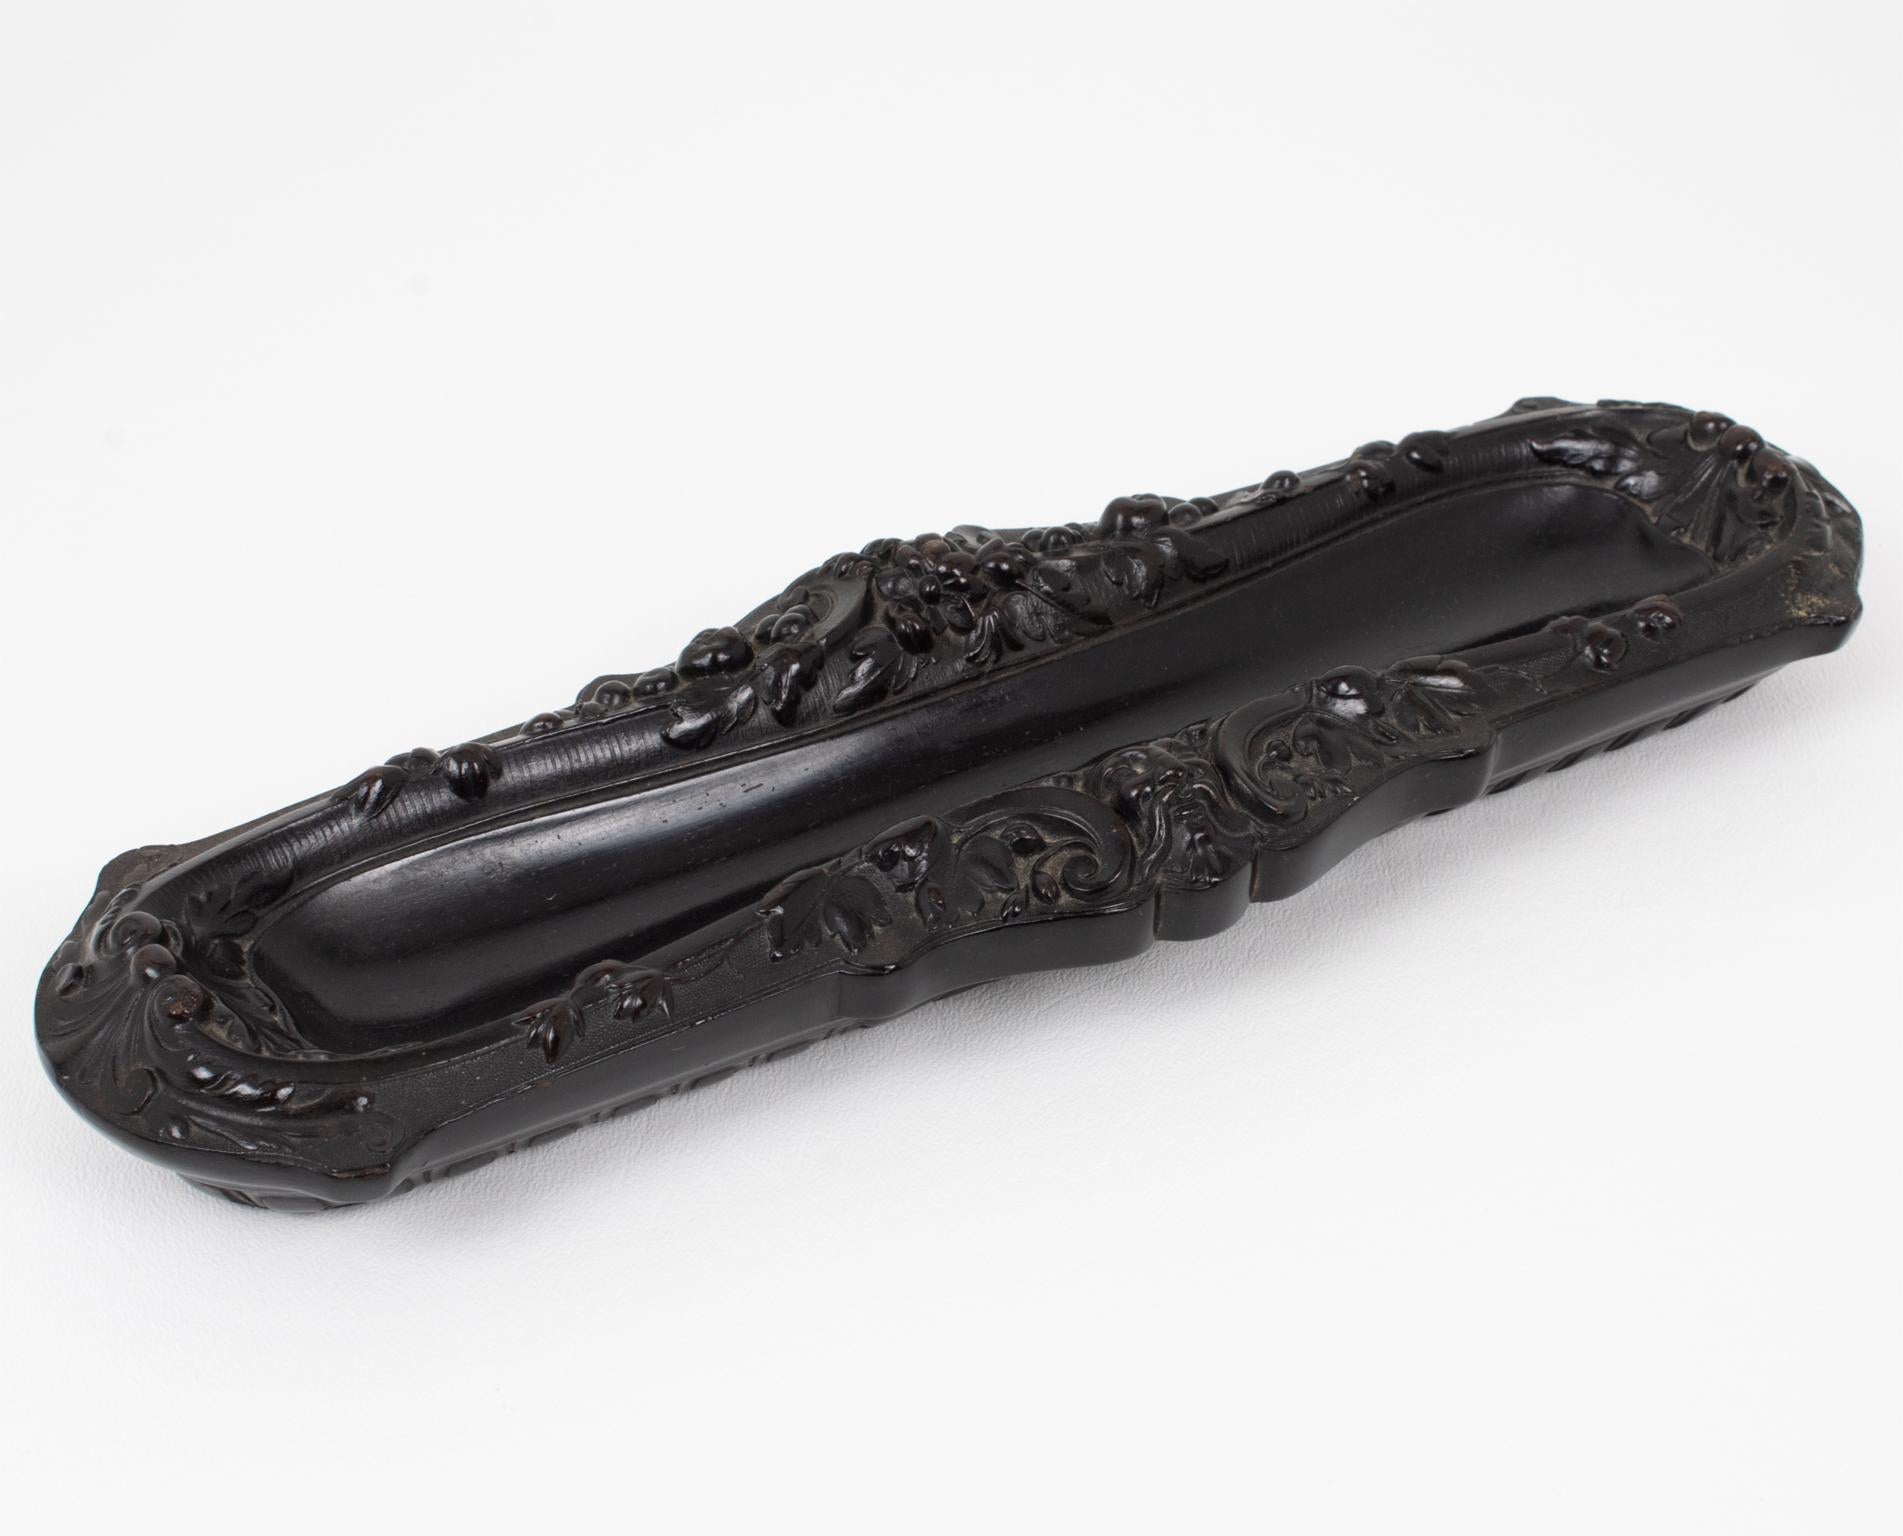 This superb Napoleon III Gutta Percha pen holder was handcrafted in France in the 1880s. The antique desk accessory is exquisitely crafted with different molded designs on each side and delicate ornamentation throughout. There is no known